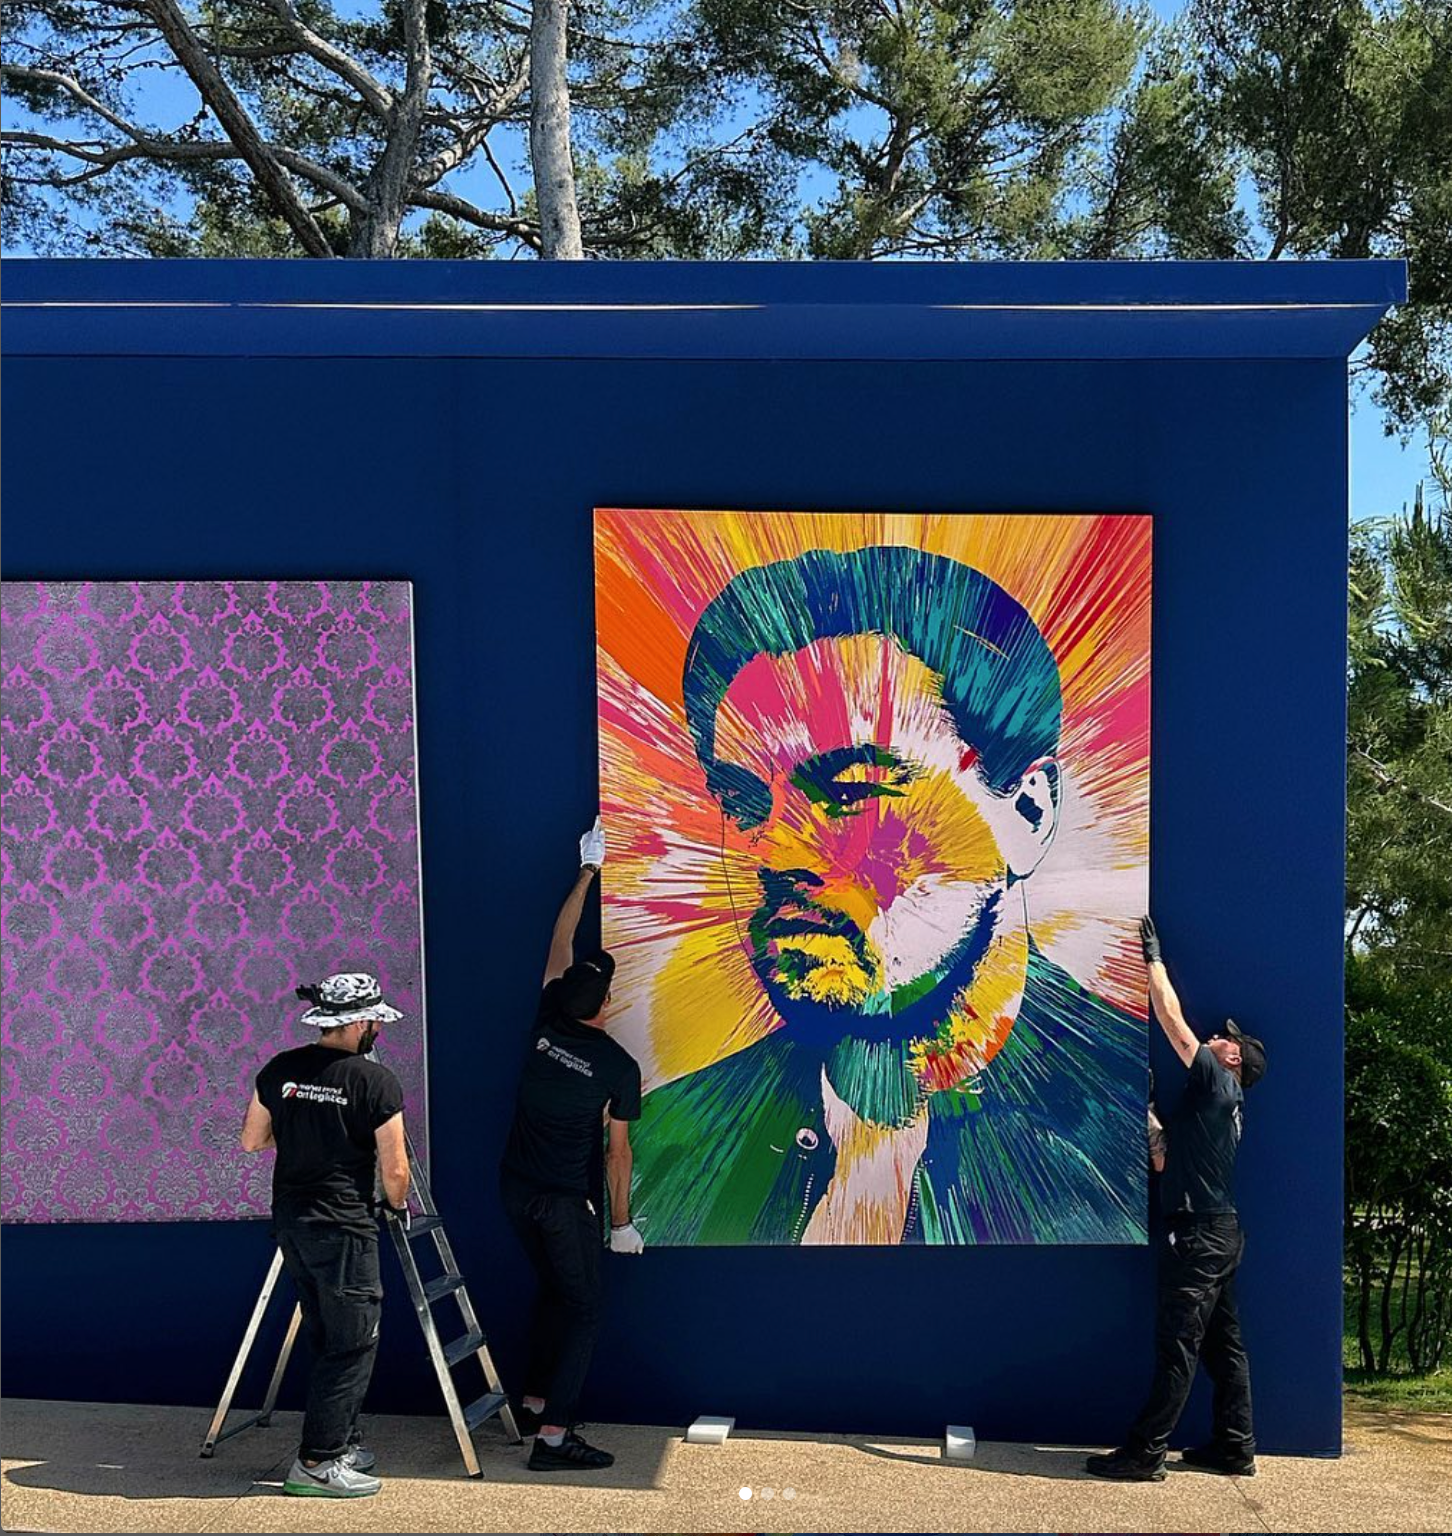 Damien Hirst’s Colorful Spin Painting of Leonardo DiCaprio Just Raised $1.3 Million for Charity